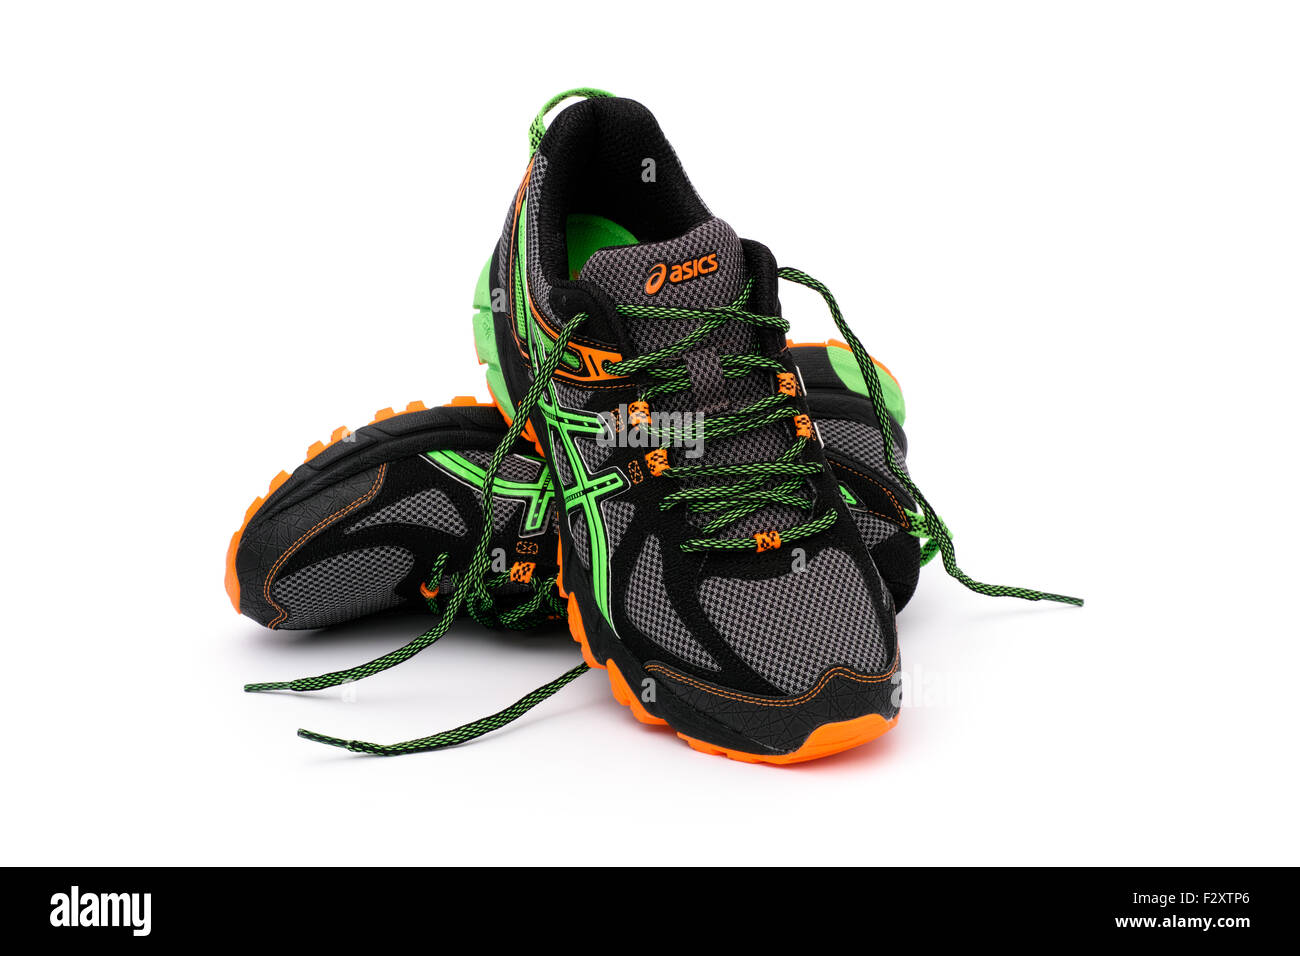 Asics Cut Out Stock Images -